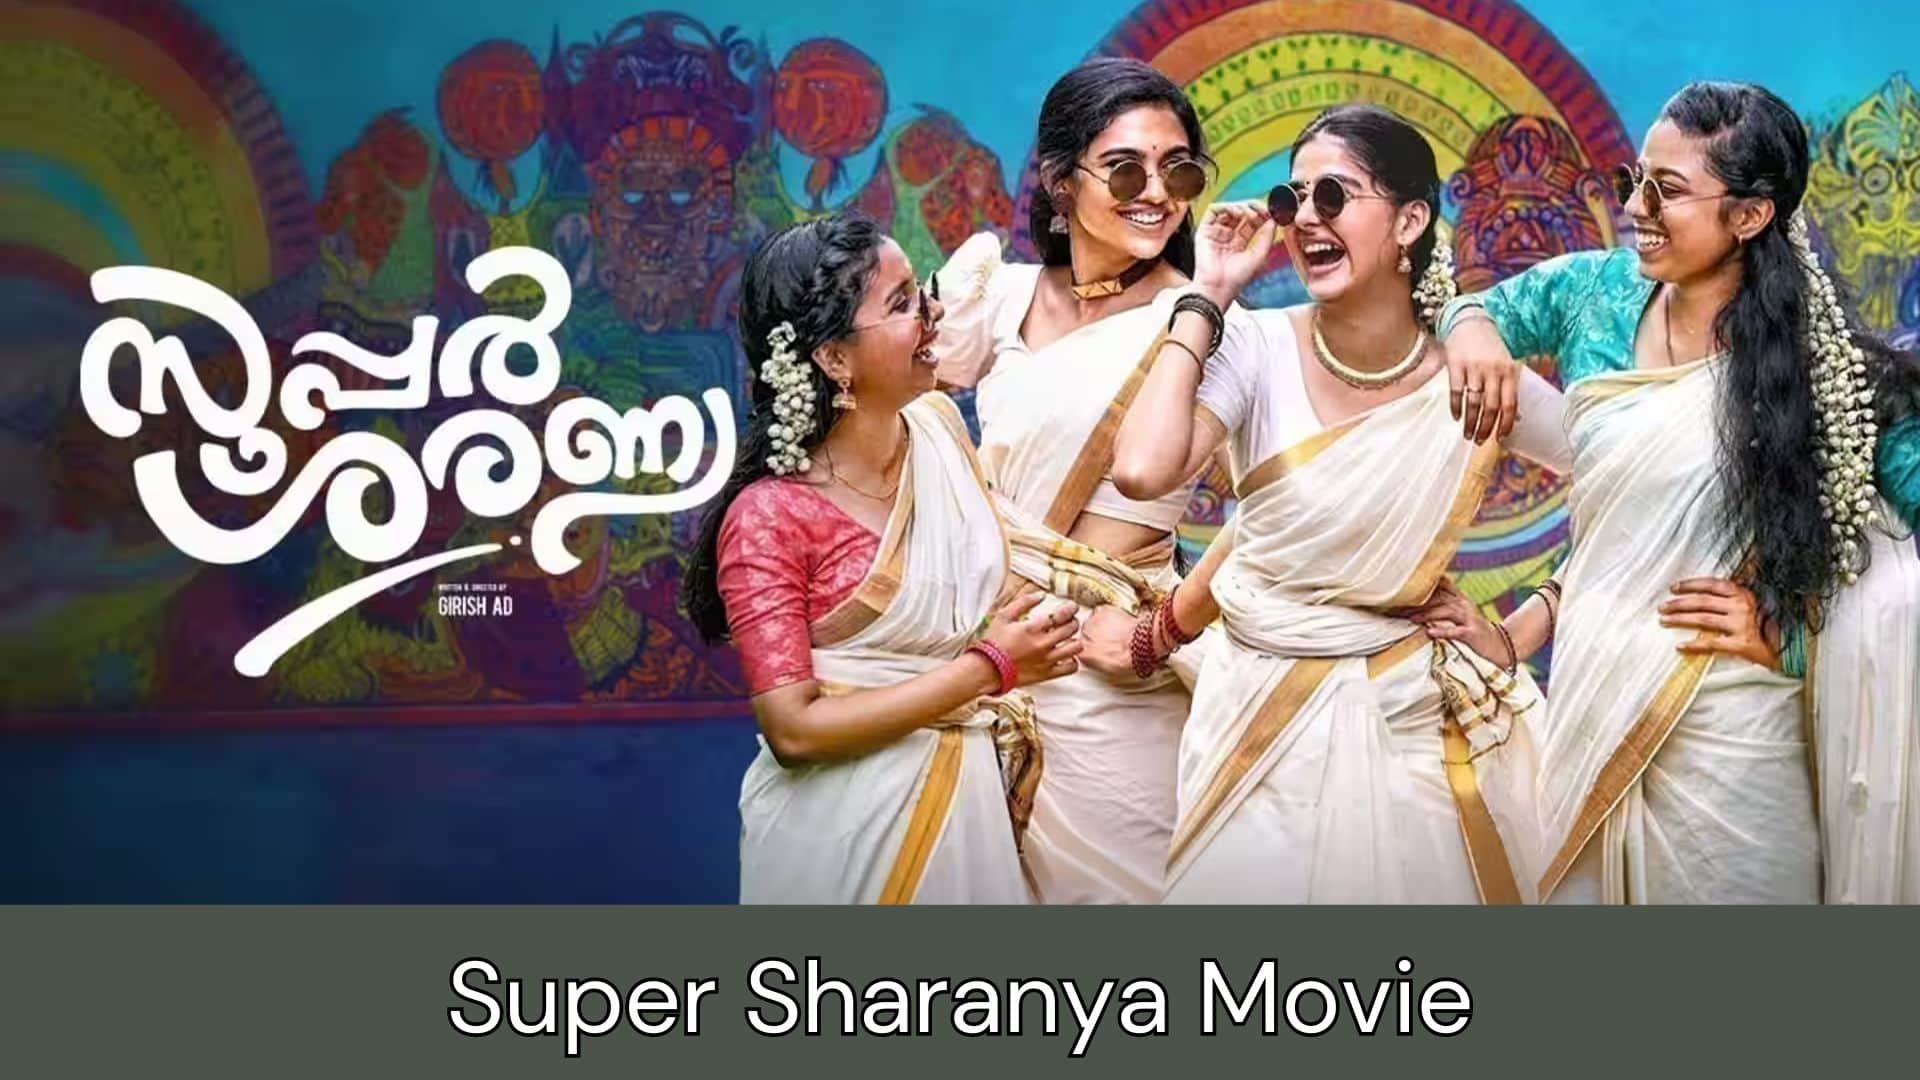 Super Sharanya Movie Online, Actress name, Review, Cast